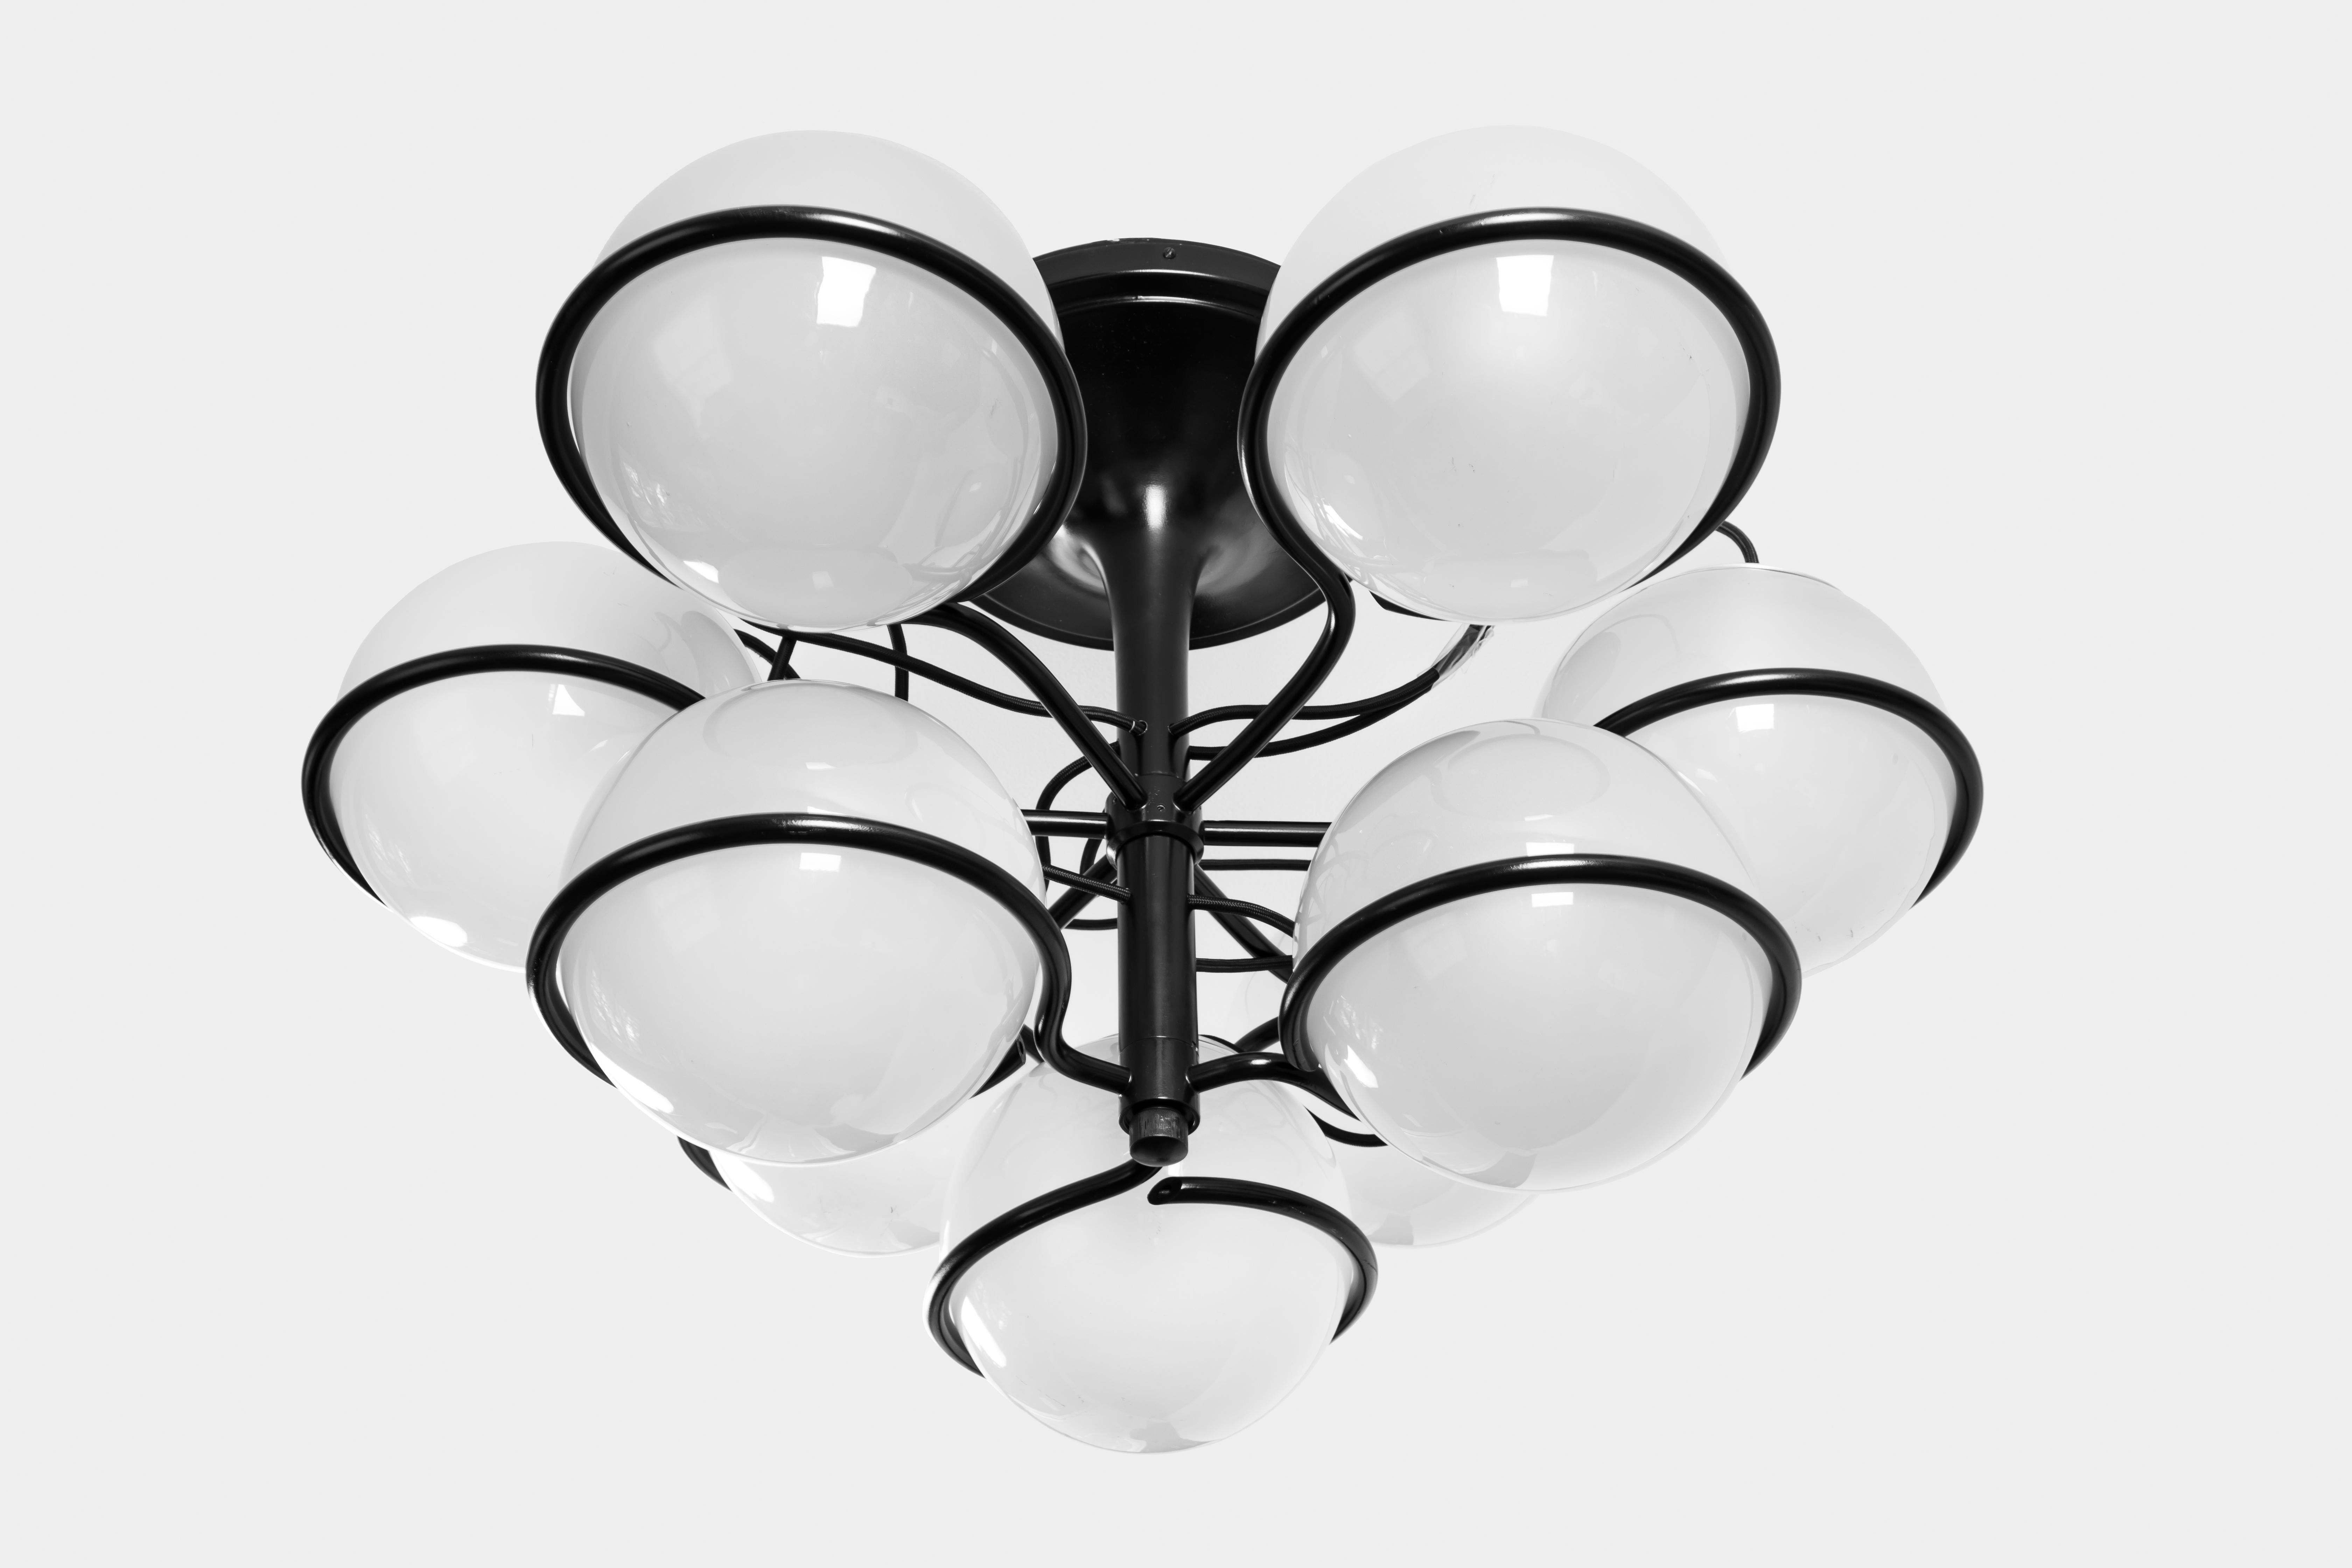 Gino Sarfatti for Arteluce black metal mounting structure holding two rows - six on top and three on the bottom - of blown frosted glass globes, Italy, 1963. Partial Arteluce label on rim of metal base and all original blown glass globes. An iconic